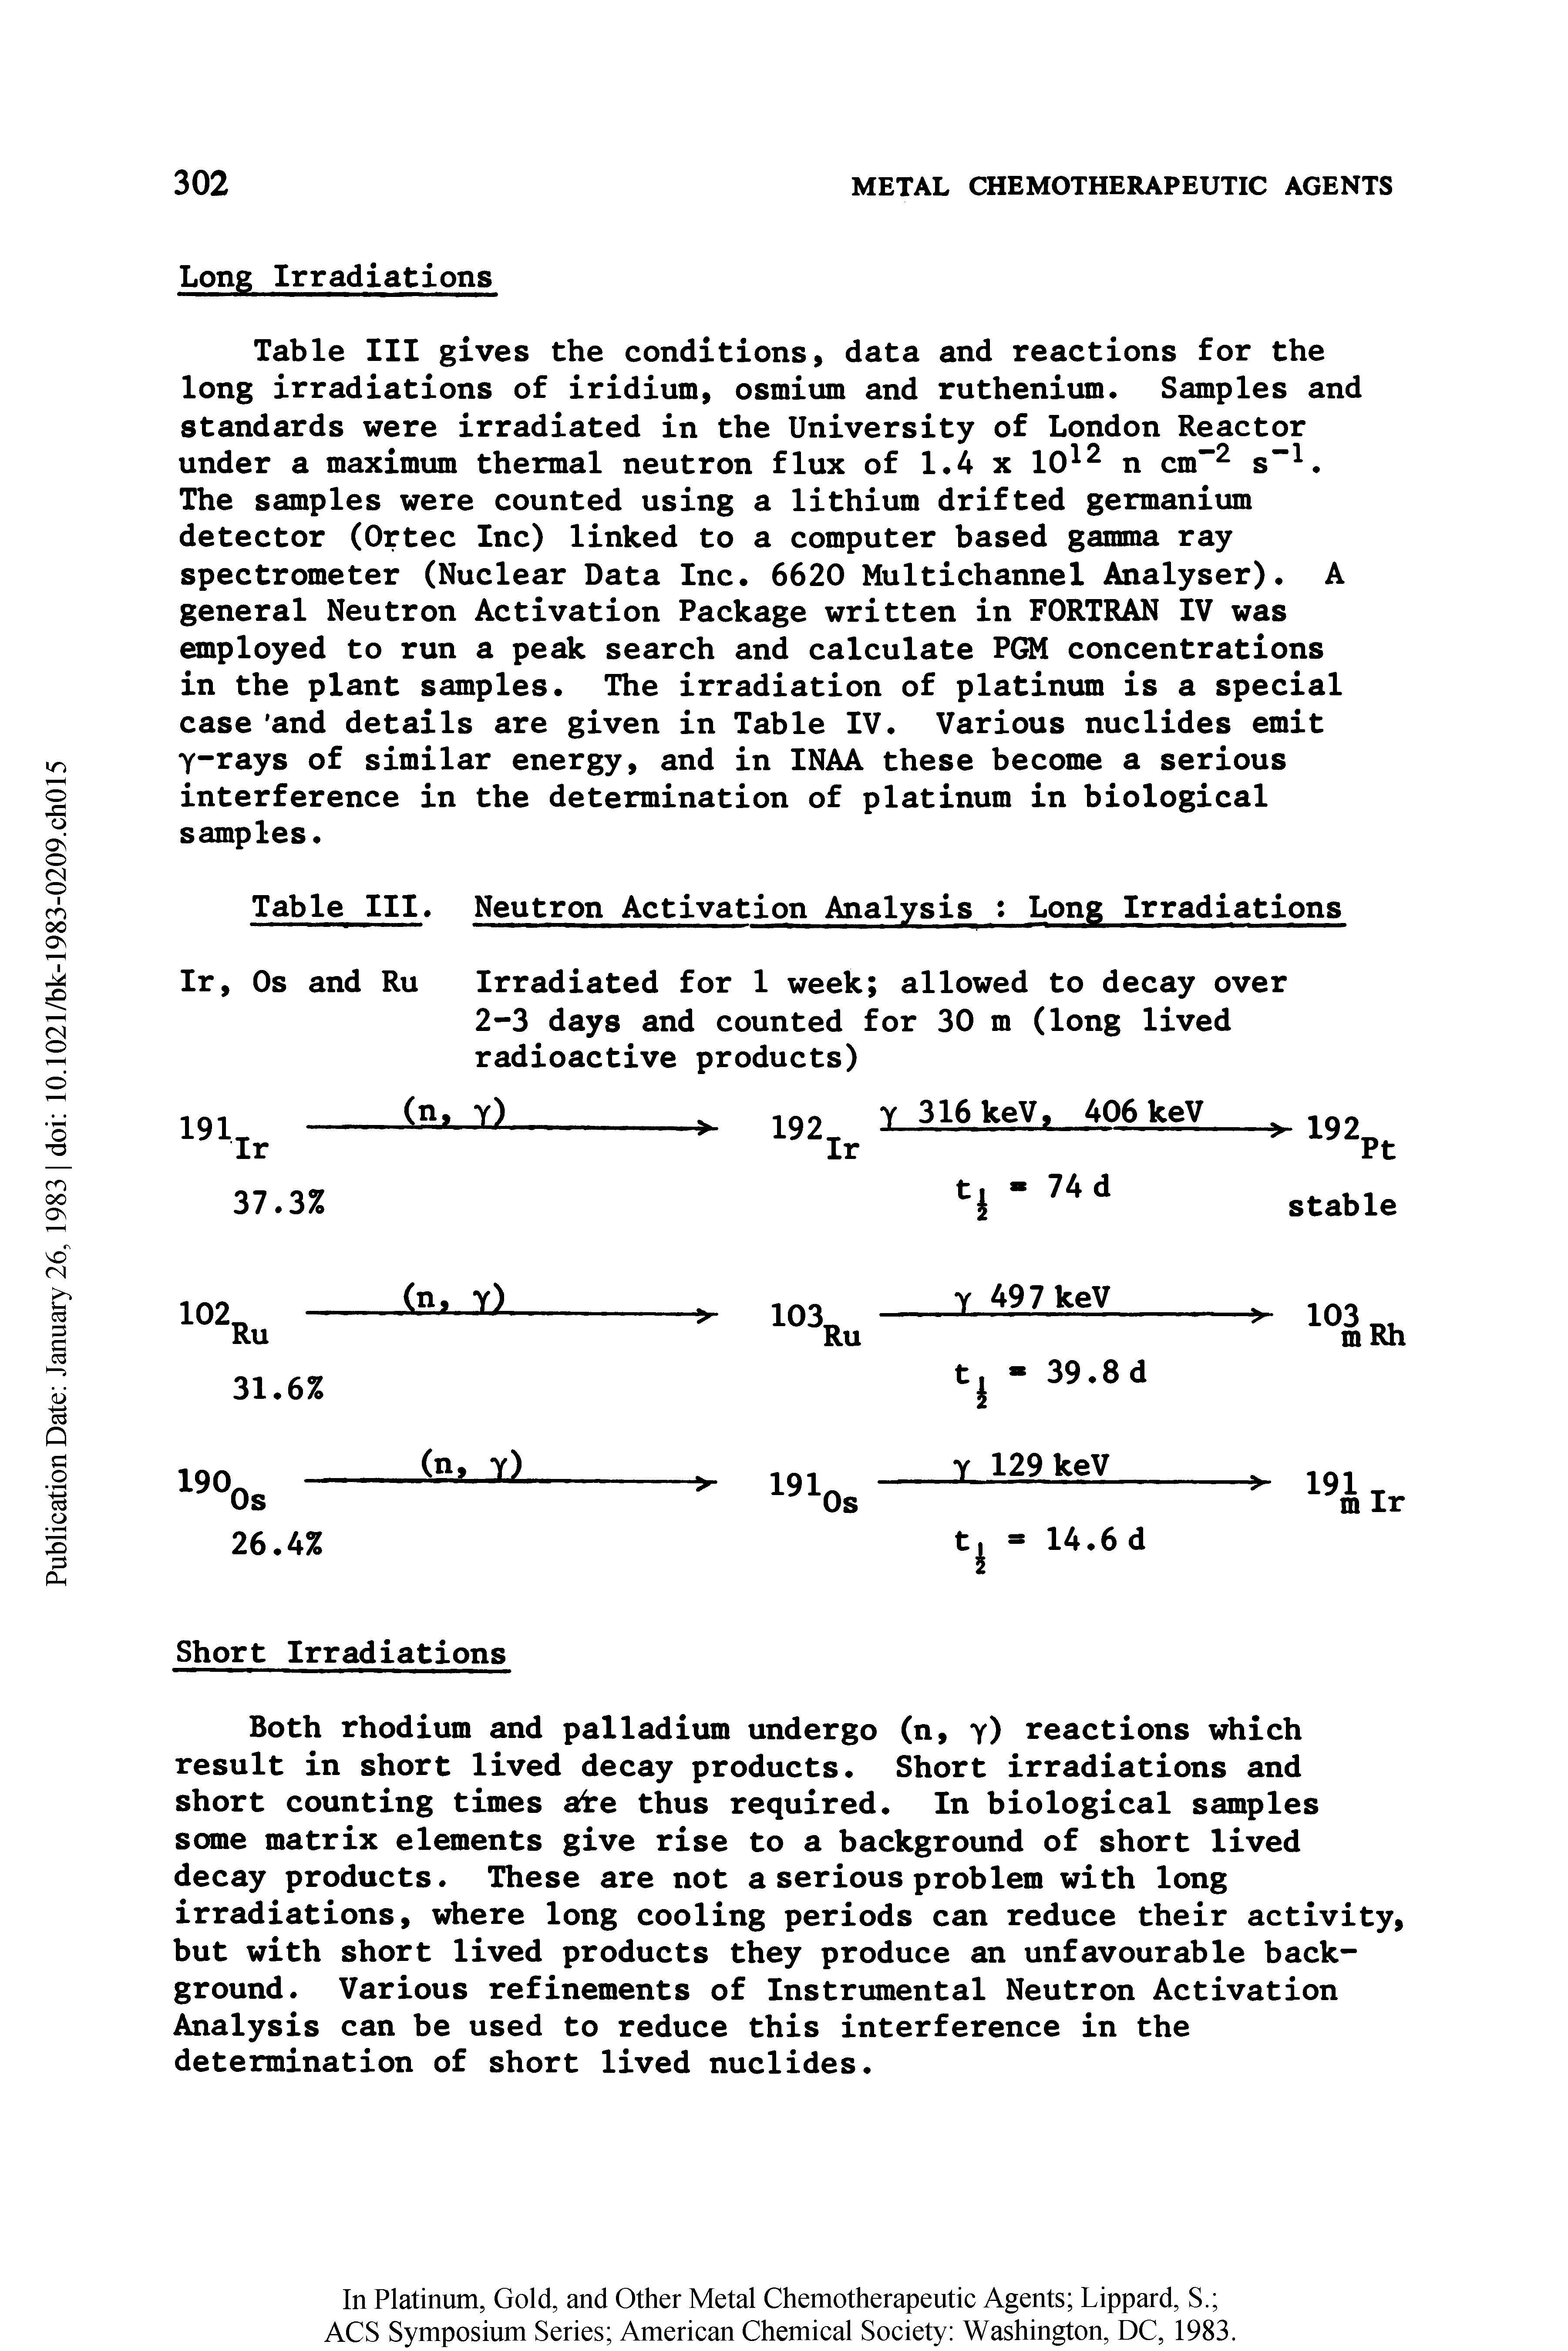 Table III gives the conditions, data and reactions for the long irradiations of iridium, osmium and ruthenium. Samples and standards were irradiated in the University of London Reactor under a maximum thermal neutron flux of 1.4 x 10 n cm" s". The samples were counted using a lithium drifted germanium detector (Ortec Inc) linked to a computer based gamma ray spectrometer (Nuclear Data Inc. 6620 Multichannel Analyser). A general Neutron Activation Package written in FORTRAN IV was employed to run a peak search and calculate PGM concentrations in the plant samples. The irradiation of platinum is a special case and details are given in Table IV. Various nuclides emit y-rays of similar energy, and in INAA these become a serious interference in the determination of platinum in biological samples.